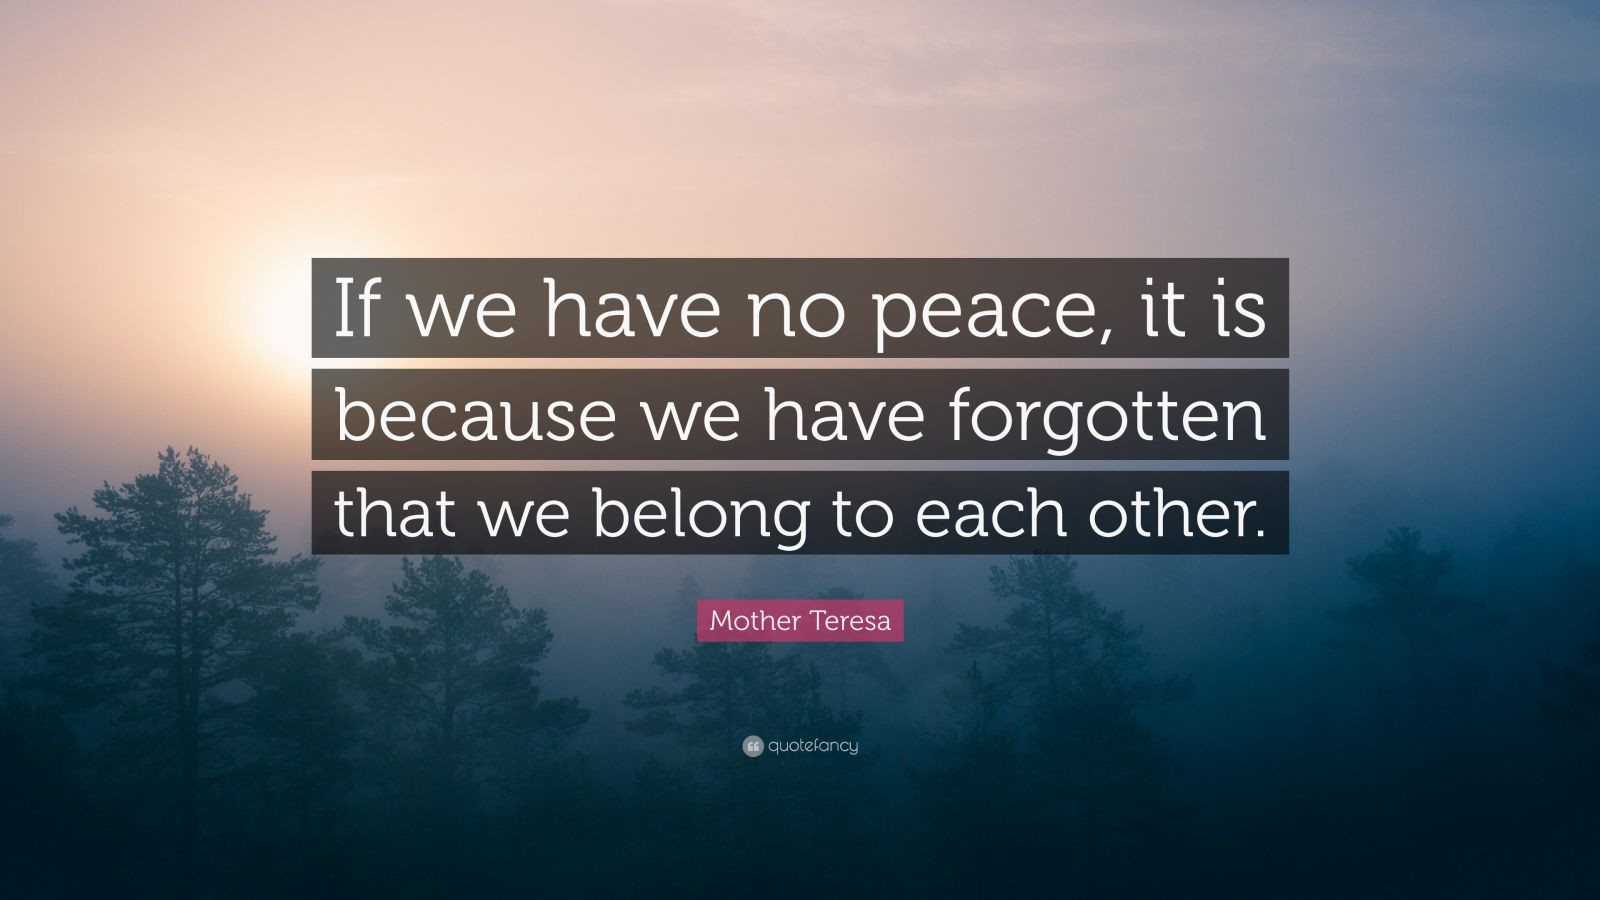 Mother Teresa Peace Quote
 Mother Teresa Quote “If we have no peace it is because